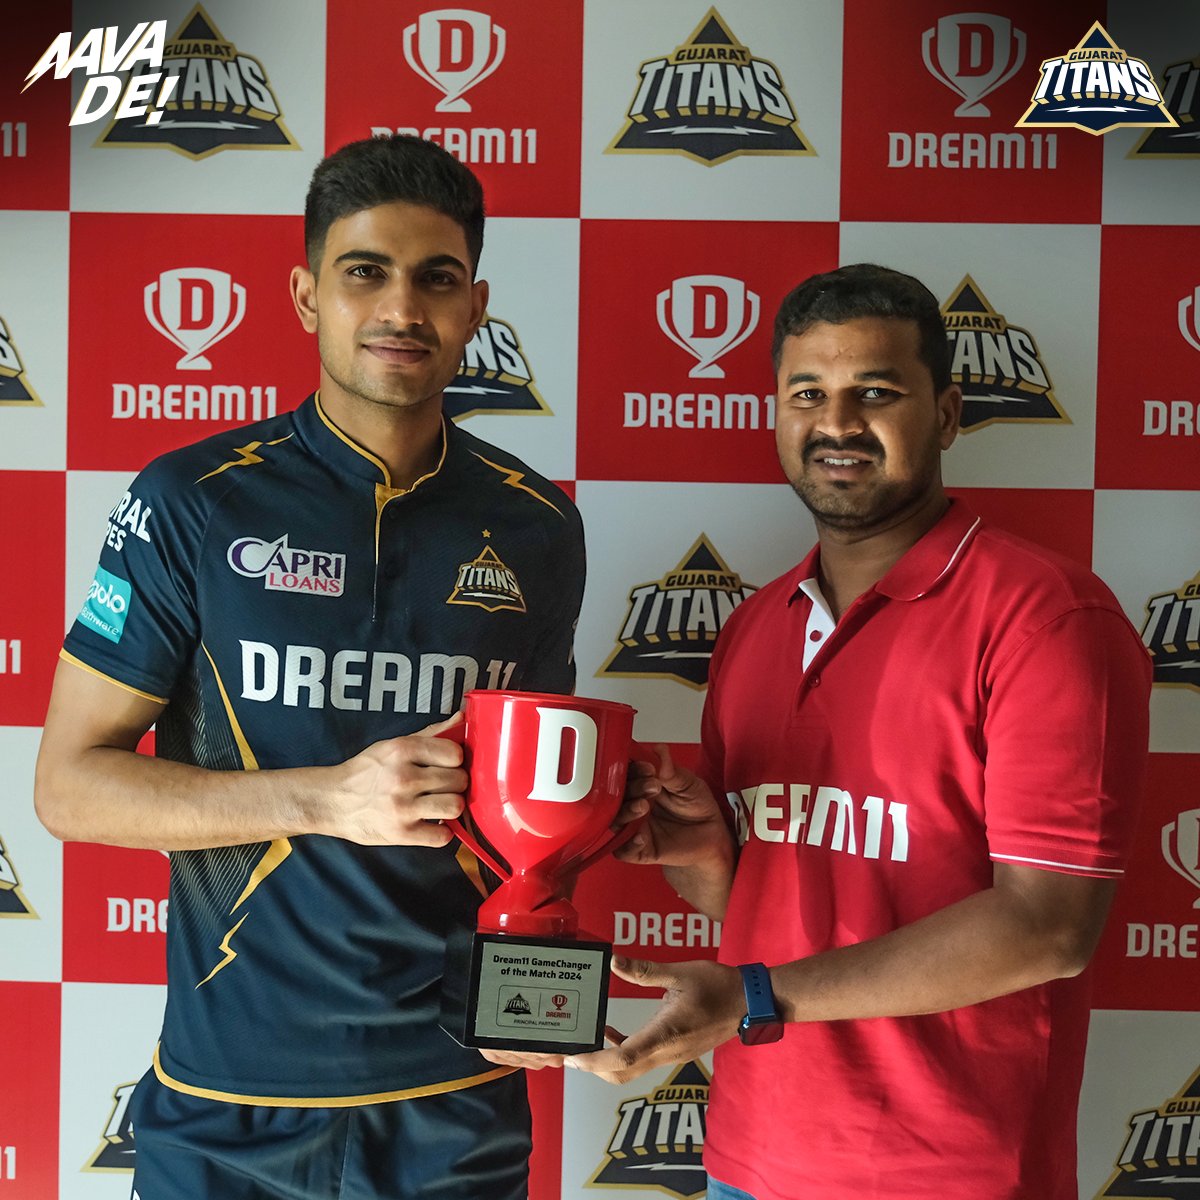 The Dream11 Champion fan, Akhil, presenting Captain @ShubmanGill with the #Dream11GameChanger award for his game changing performance in last night’s victory - 151 points! 👏 #AavaDe | #GTKarshe | #TATAIPL2024 | #GTvCSK | @Dream11